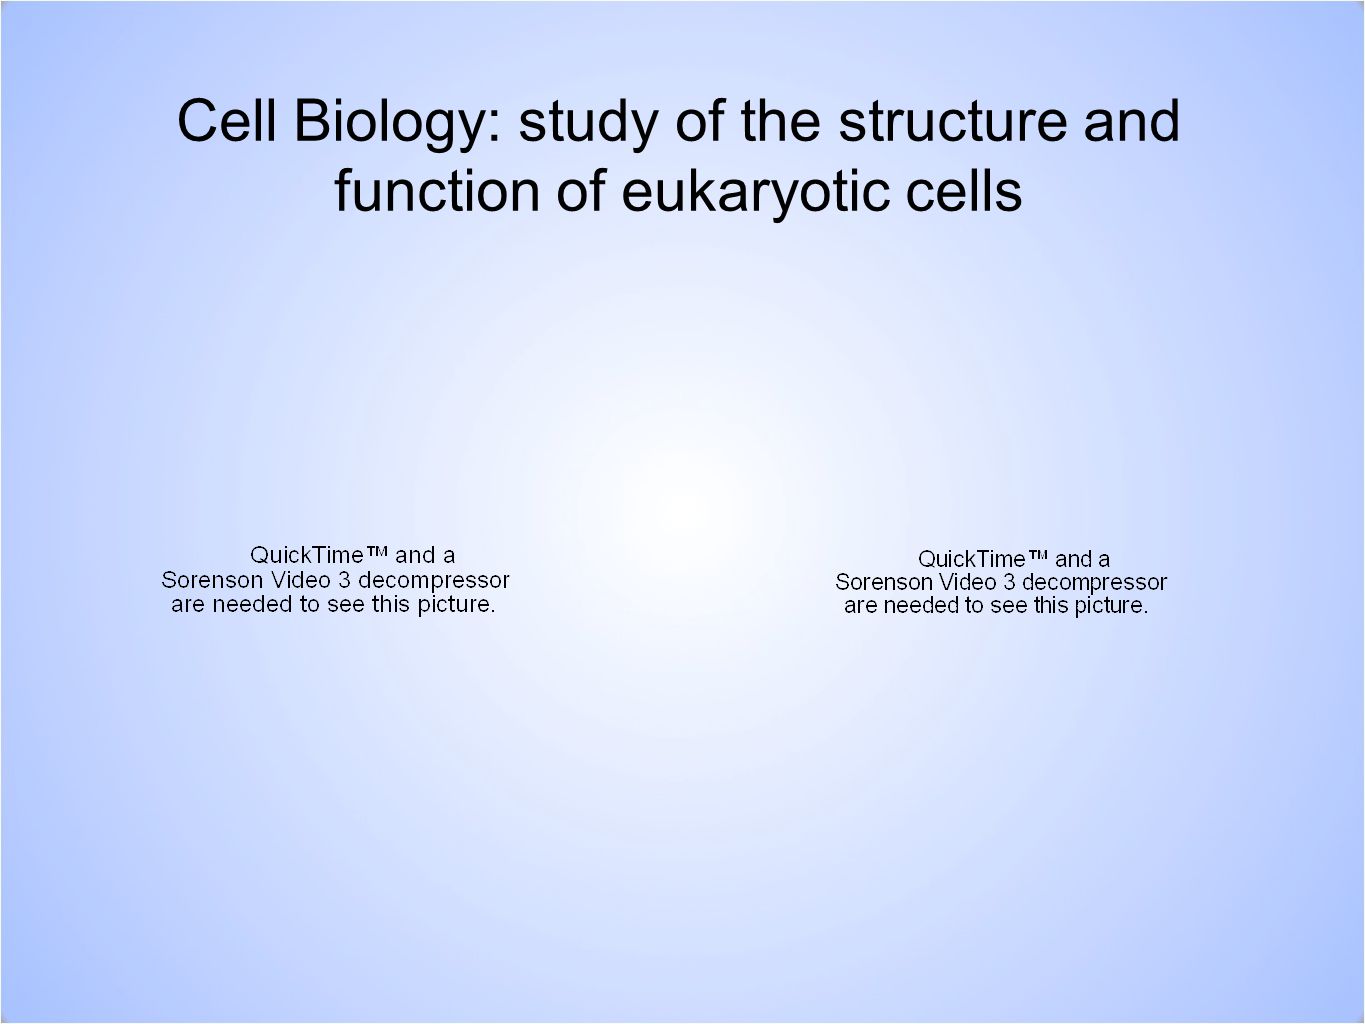 Cell Biology: study of the structure and function of eukaryotic cells